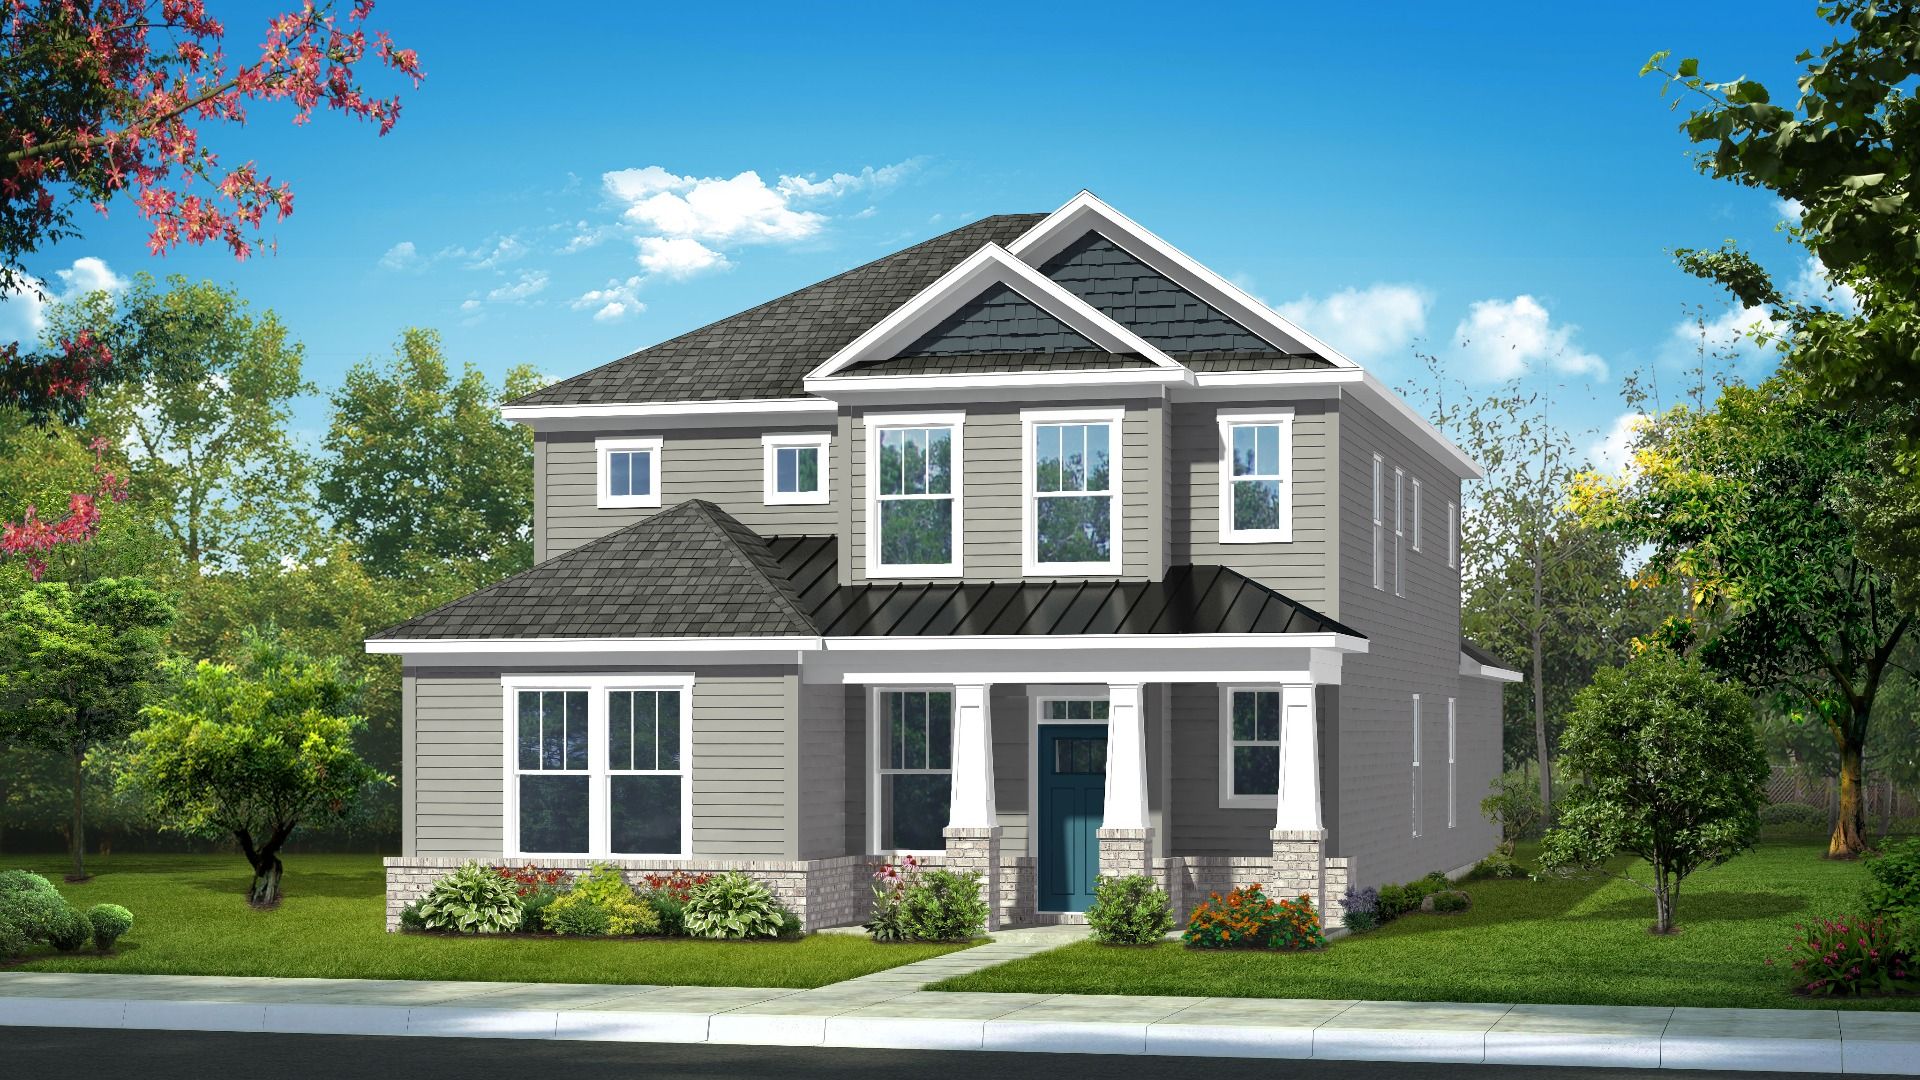 Raymore Elevation 9:Elevation 9 of The Raymore Design by DRB Homes